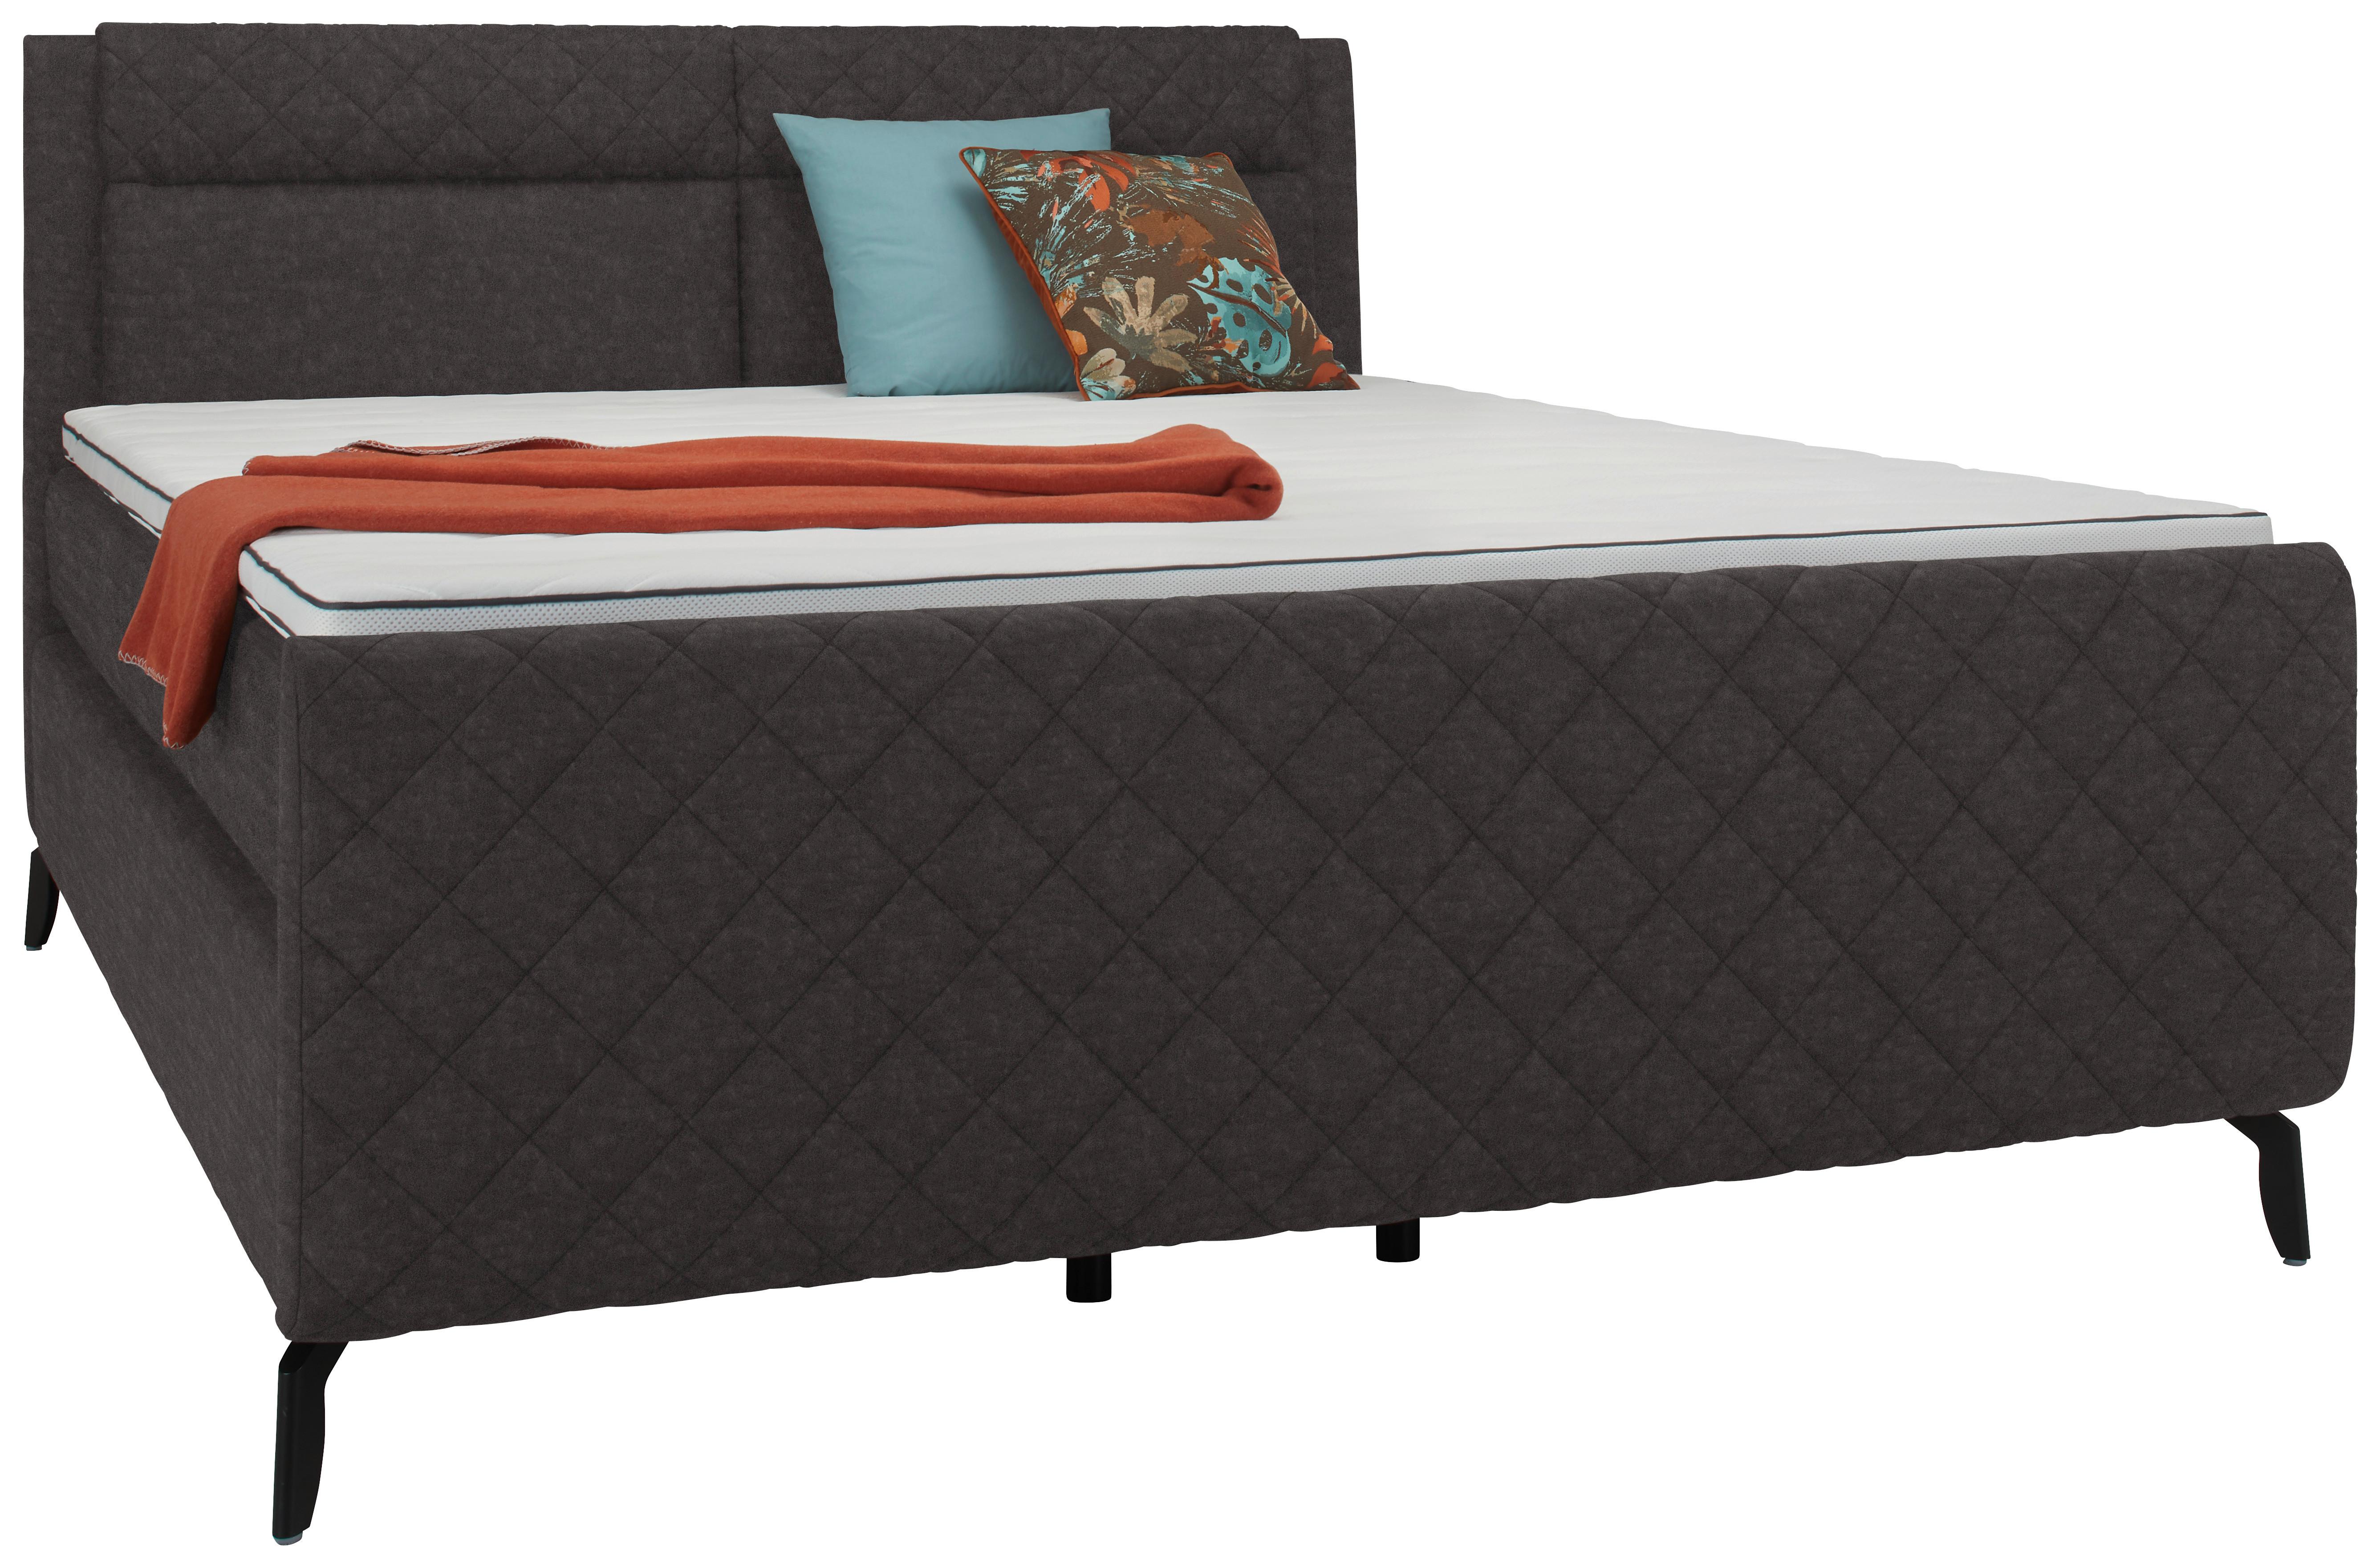 Boxspringbett in Taupe ca. 180x200cm - Taupe/Schwarz, KONVENTIONELL, Holz/Kunststoff (180/200cm)